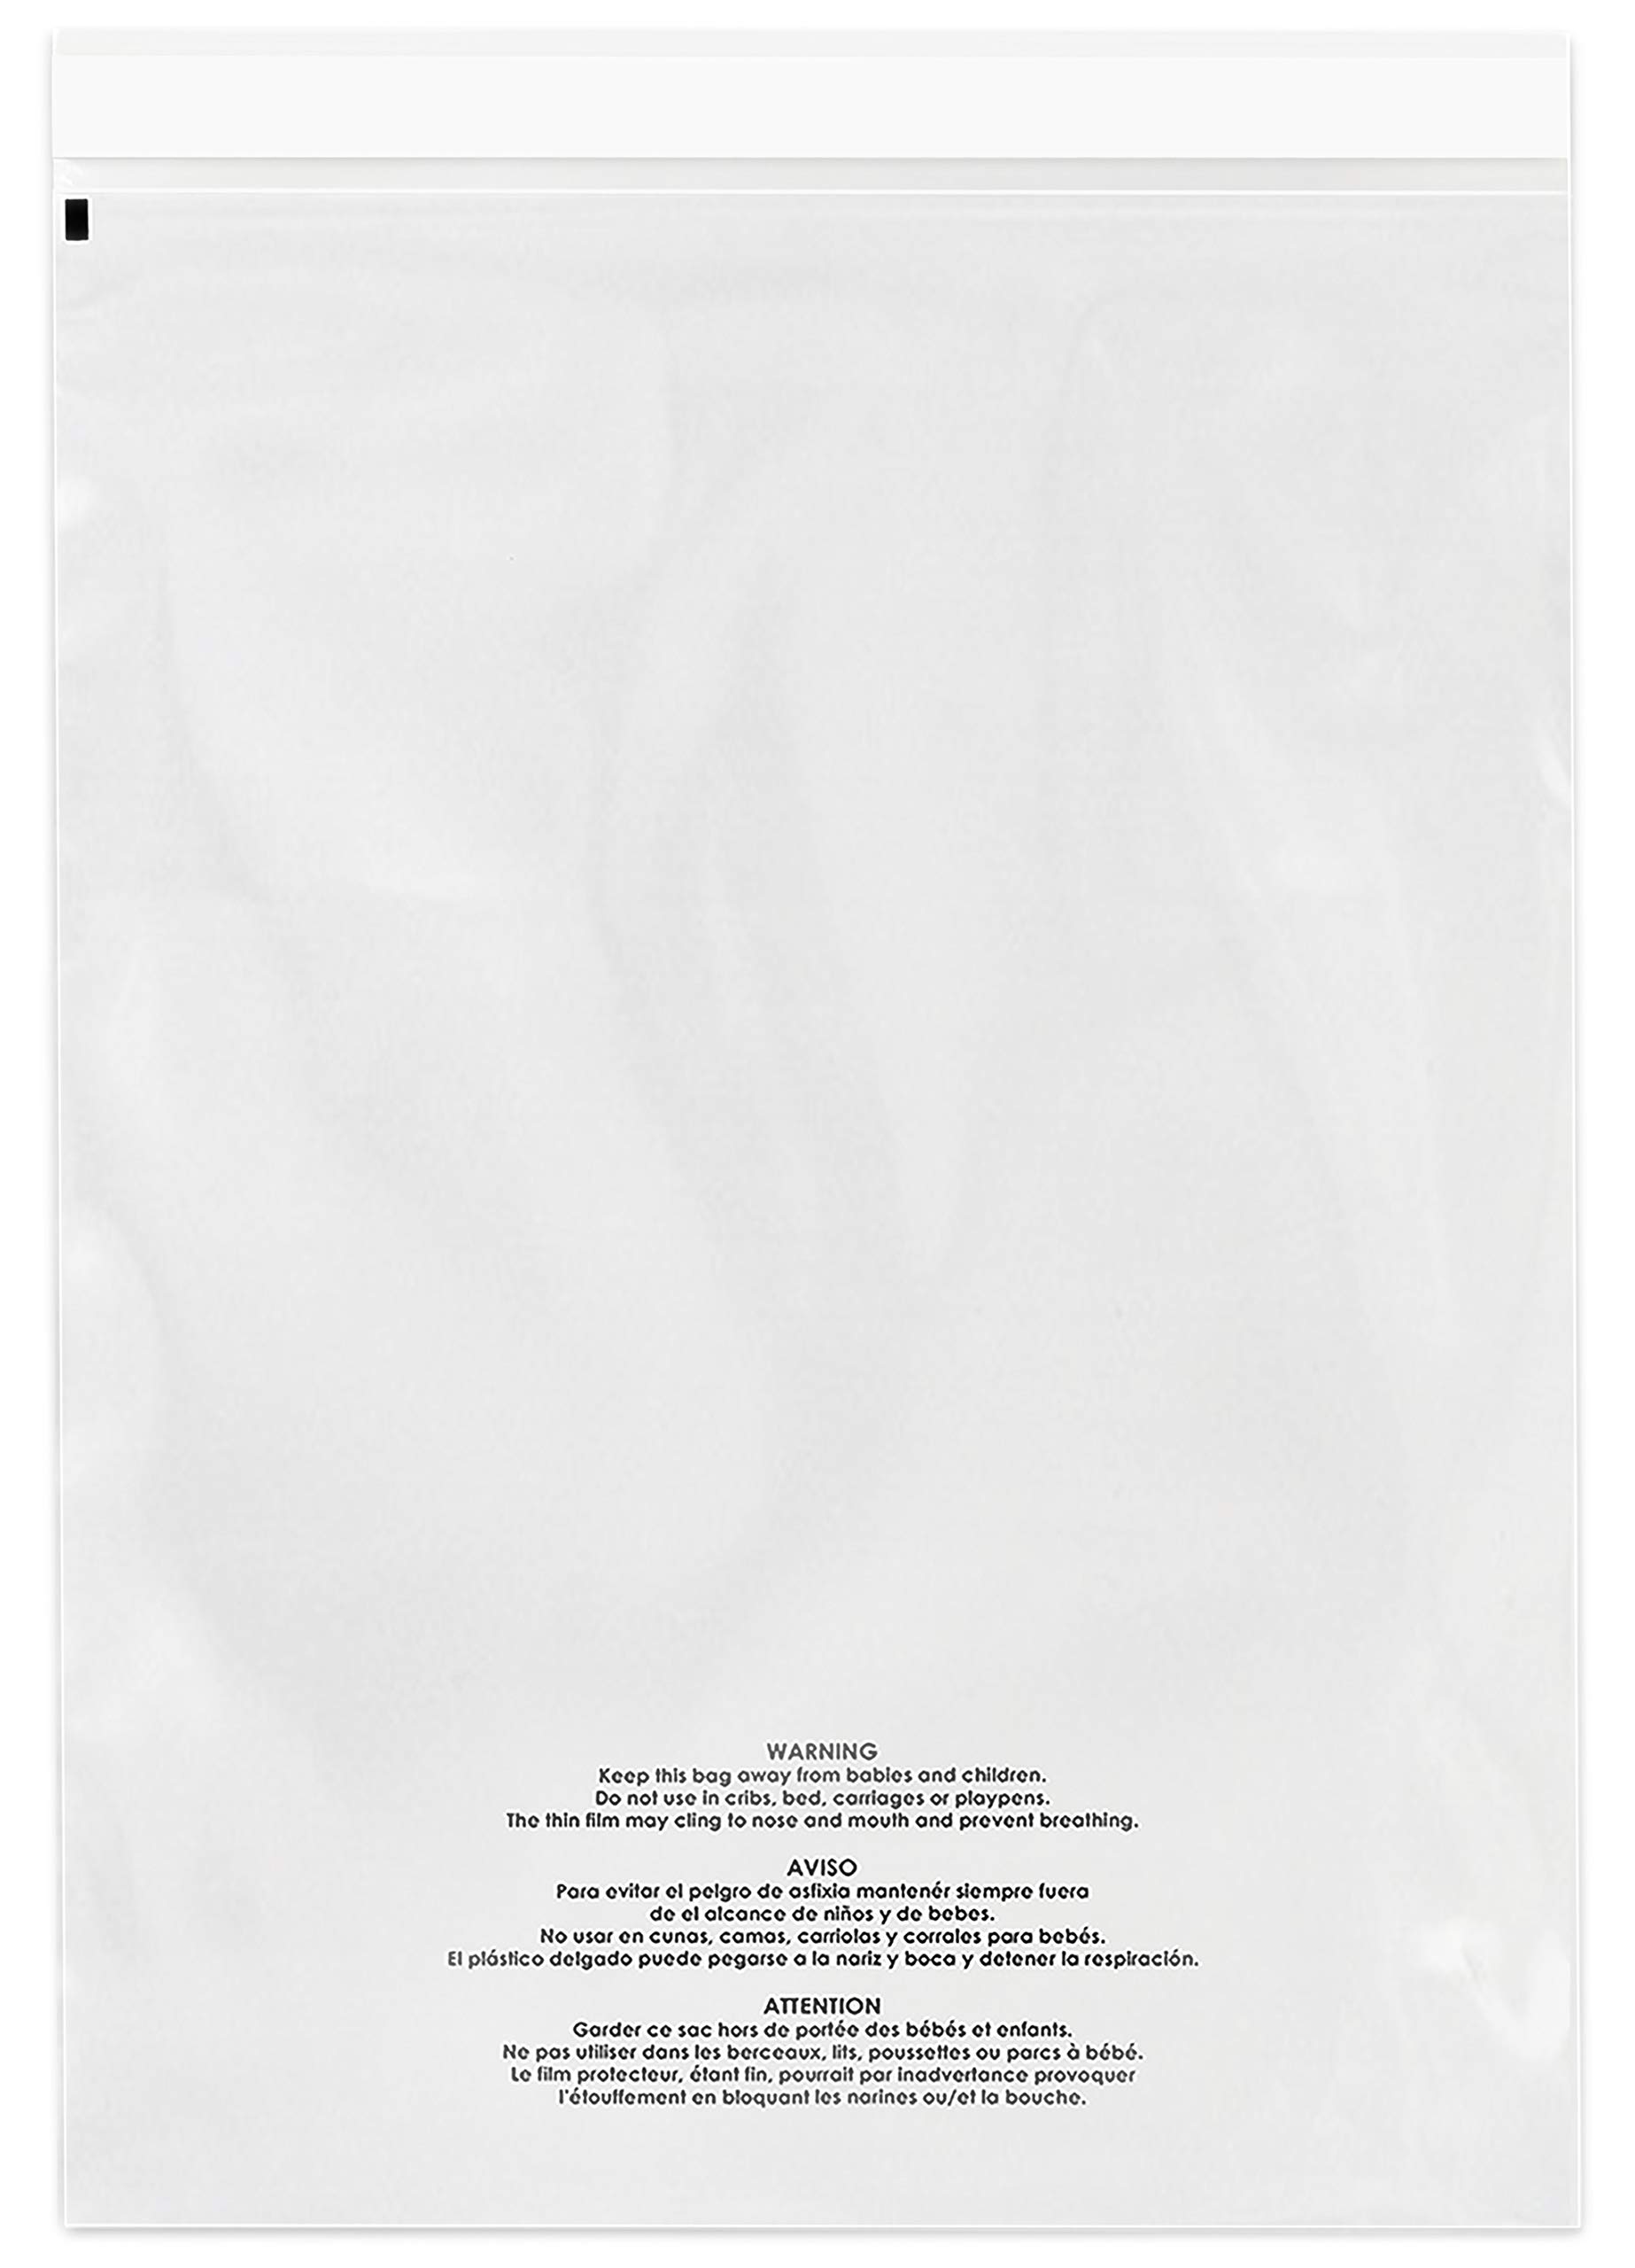 Spartan Industrial - 18" X 24" (250 Count) Self Seal Clear Poly Bags with Suffocation Warning for Packaging, Shipping & FBA - Permanent Adh...